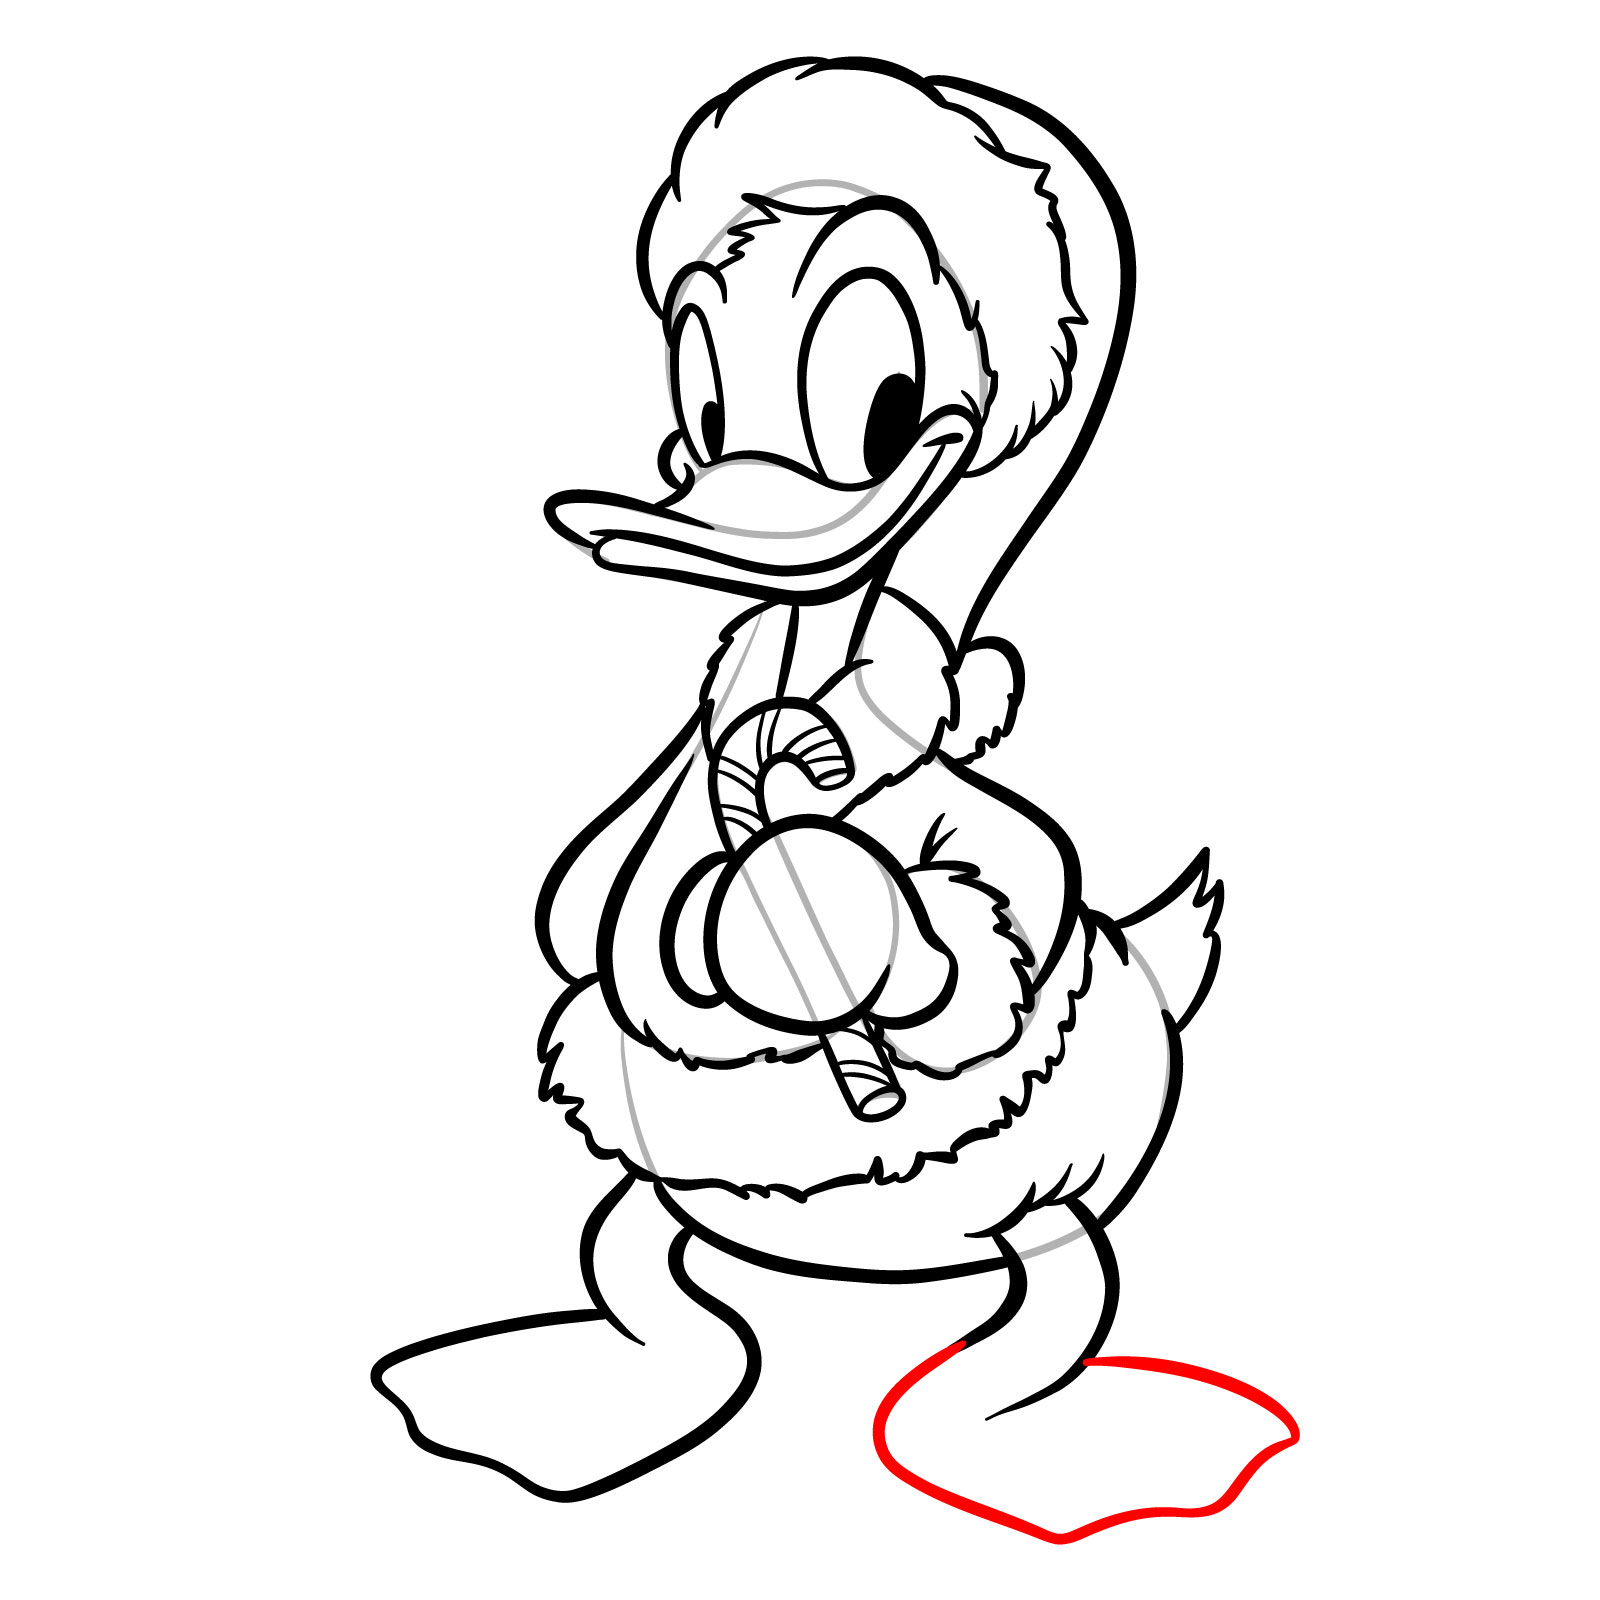 How to Draw Christmas Donald Duck - step 22